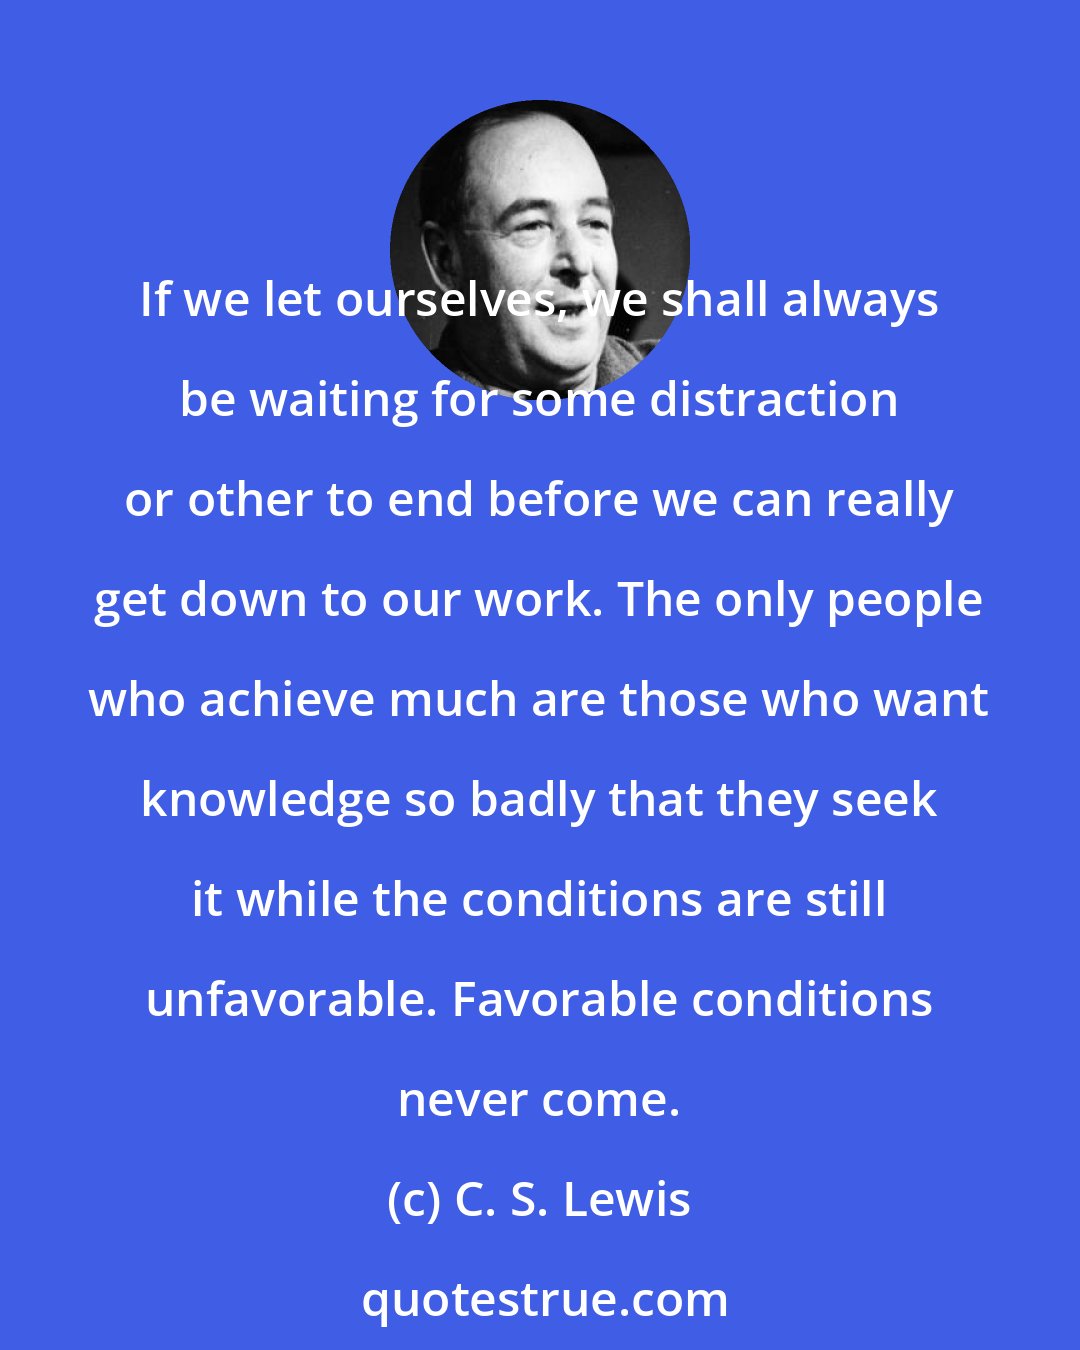 C. S. Lewis: If we let ourselves, we shall always be waiting for some distraction or other to end before we can really get down to our work. The only people who achieve much are those who want knowledge so badly that they seek it while the conditions are still unfavorable. Favorable conditions never come.